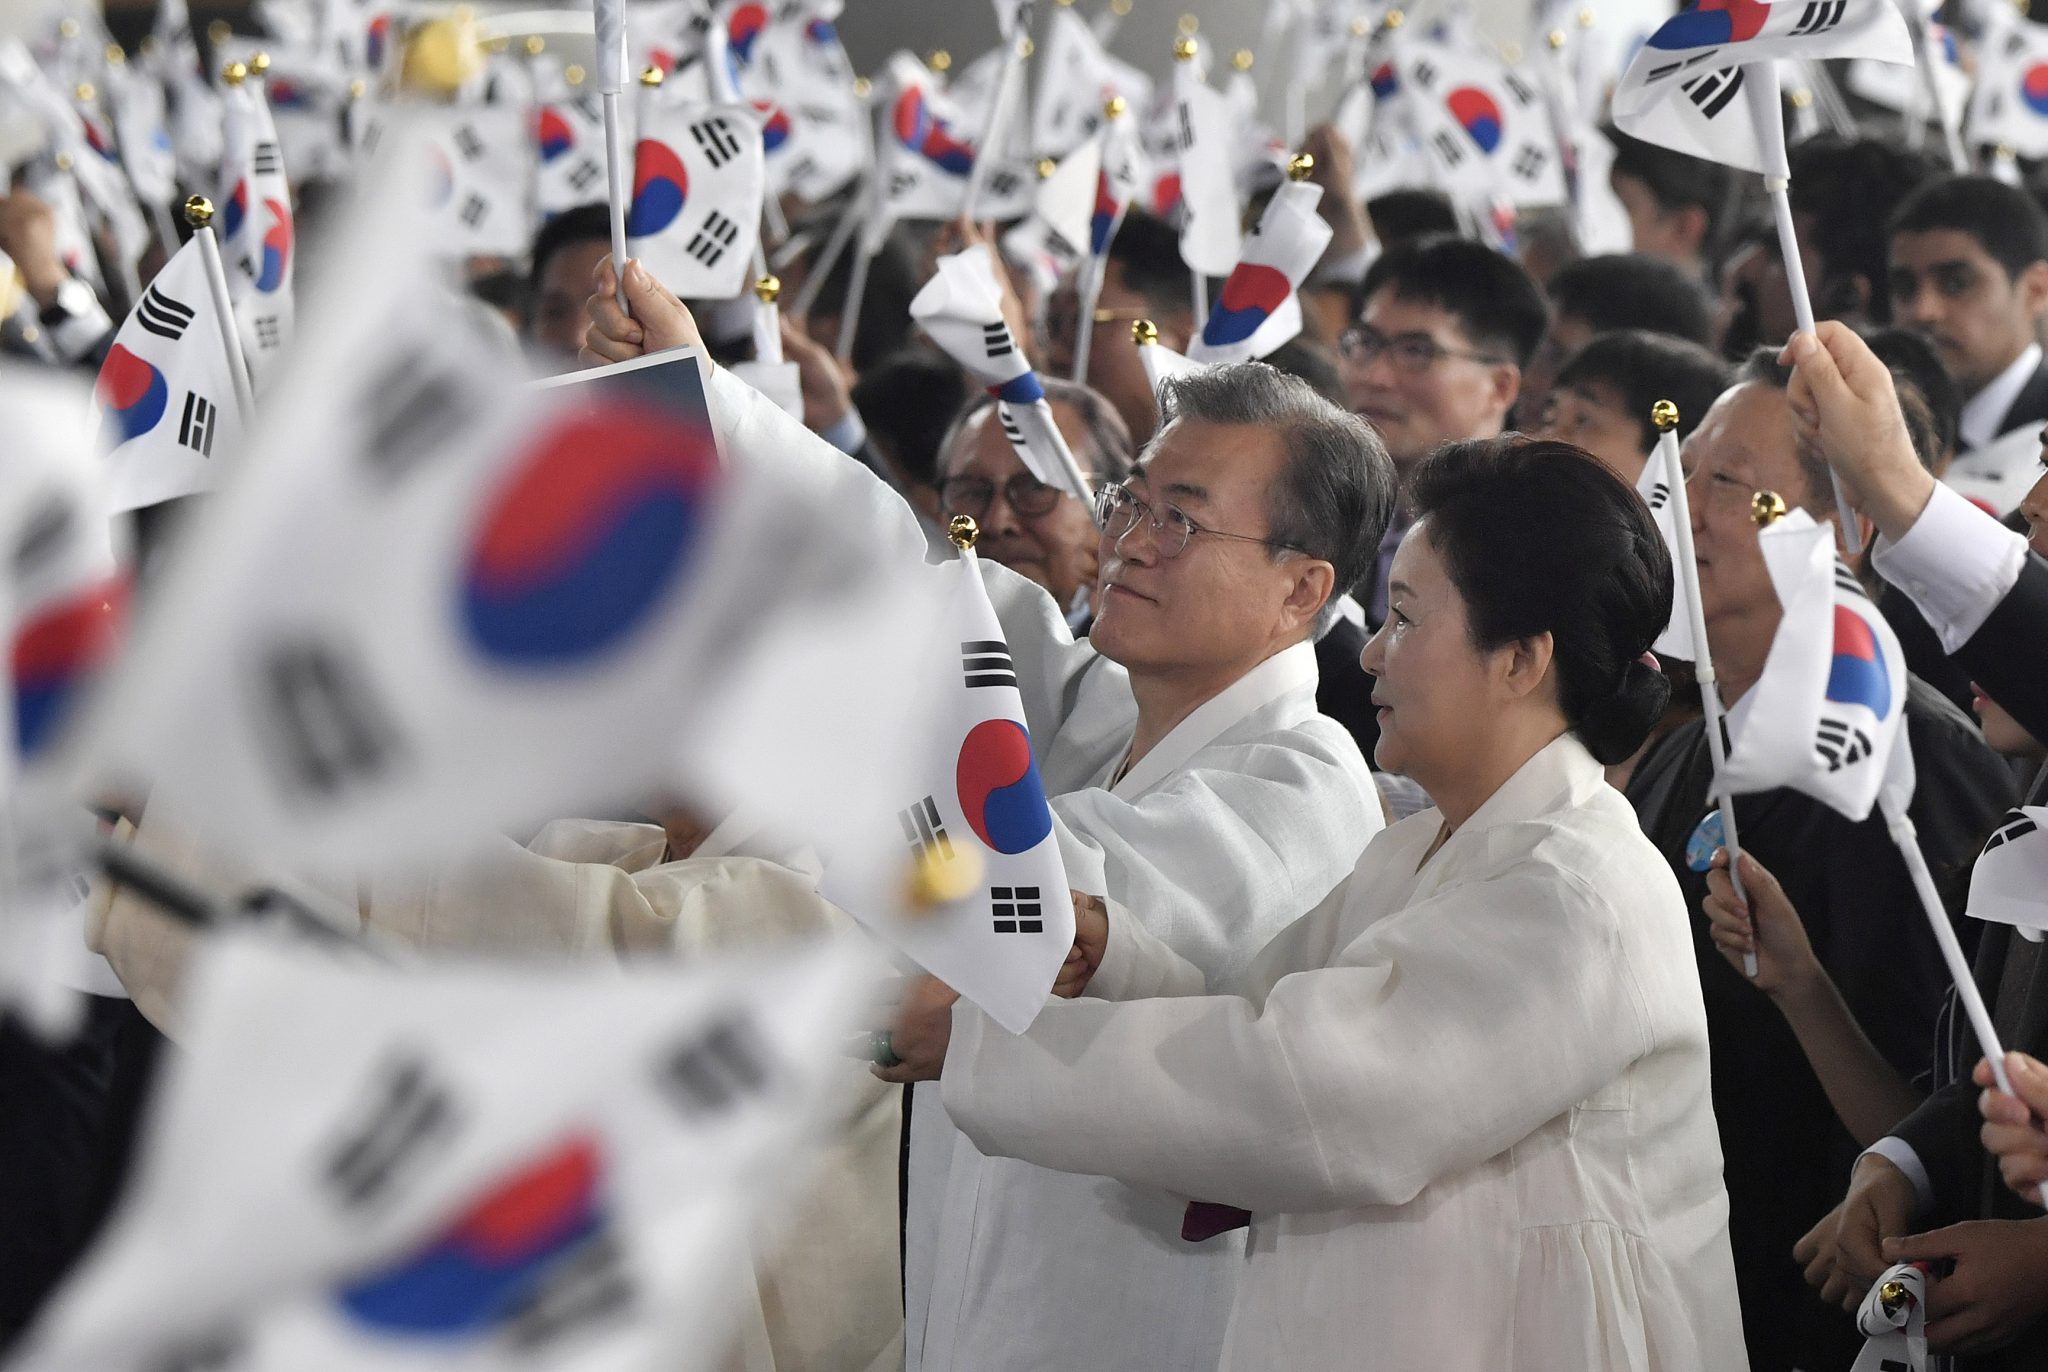 Finding economic growth in South Korea East Asia Forum